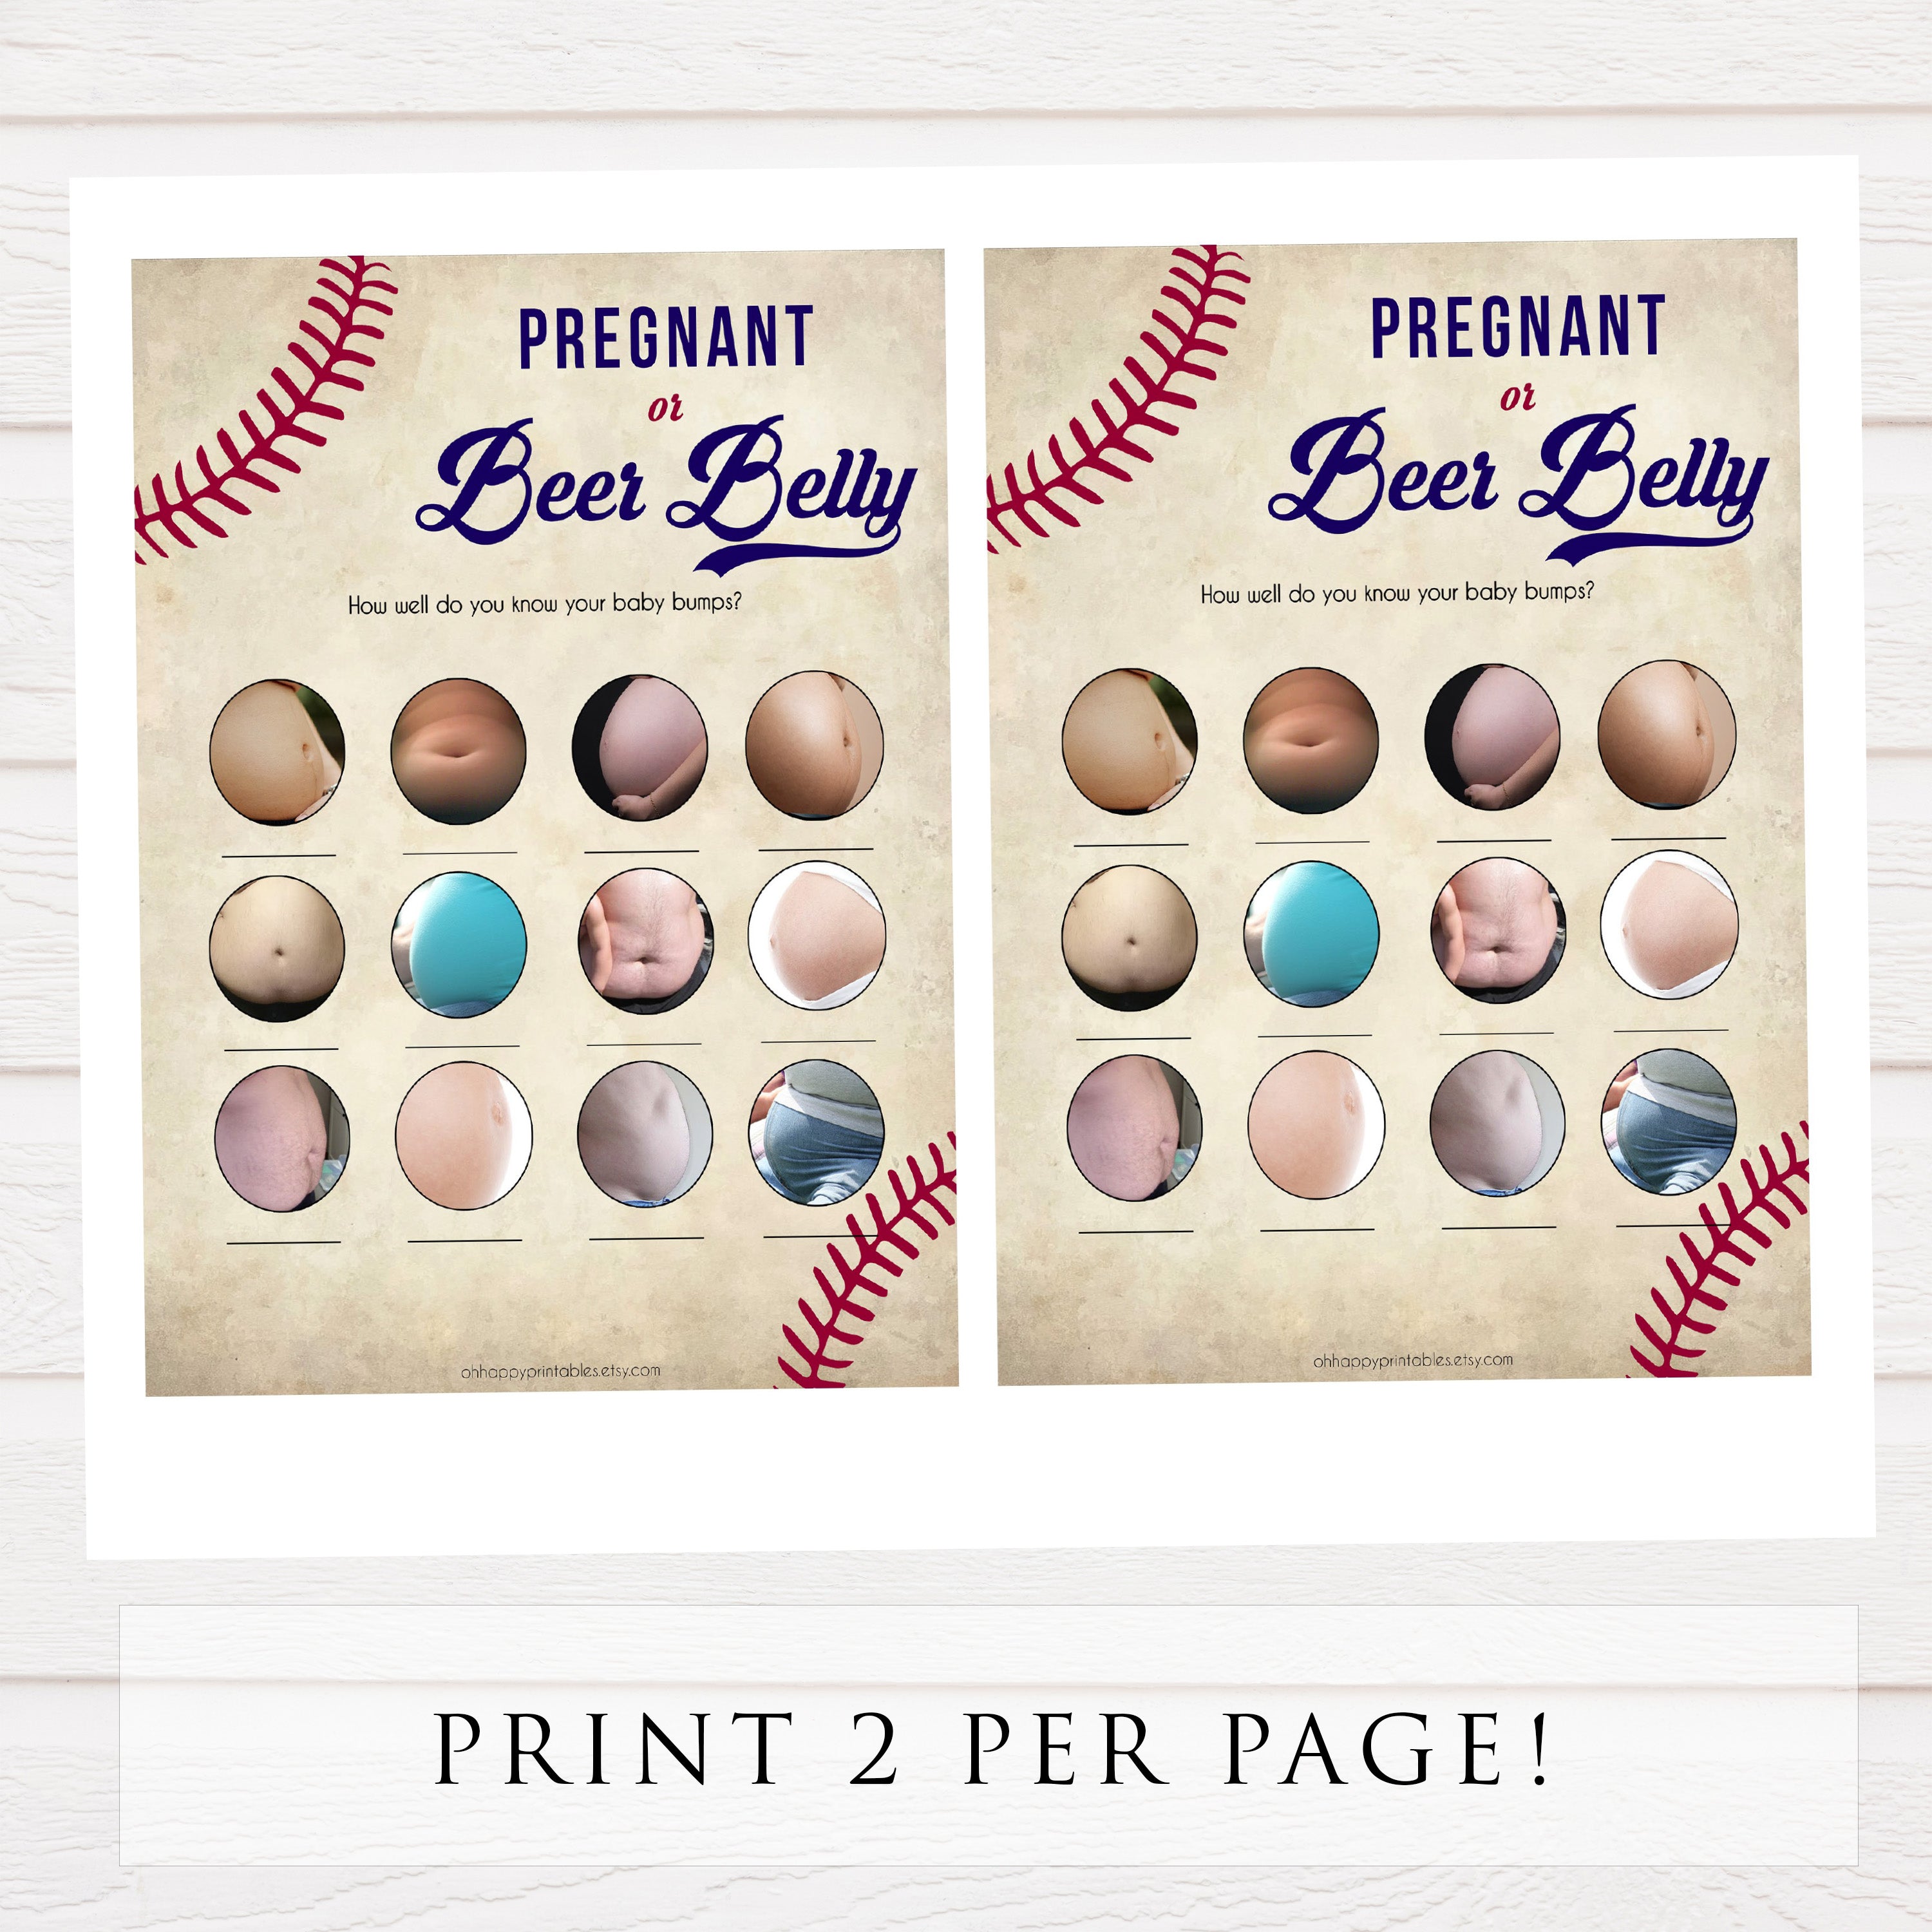 Pregnant or Beer Belly Game, Baby Shower Games, Baby Bump Beer Belly, Pregnant or Beer Belly, Baby Bump or Beer Belly, Baseball, Bump Beer, printable baby shower games, fun baby shower games, popular baby shower games